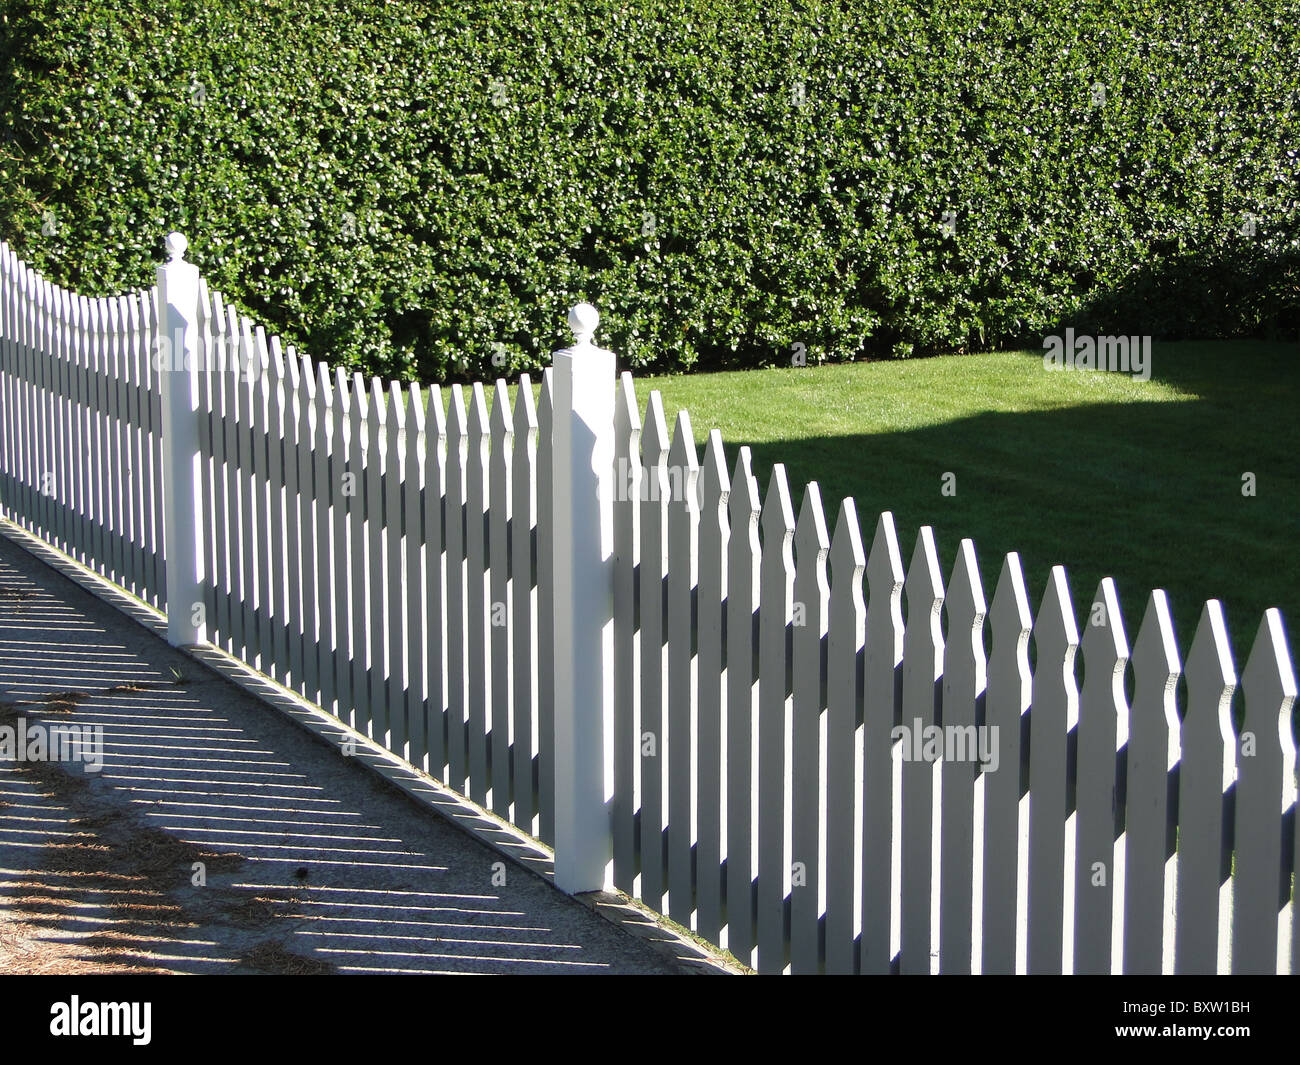 White picket fence and green hedge, Seaside Oregon Stock Photo